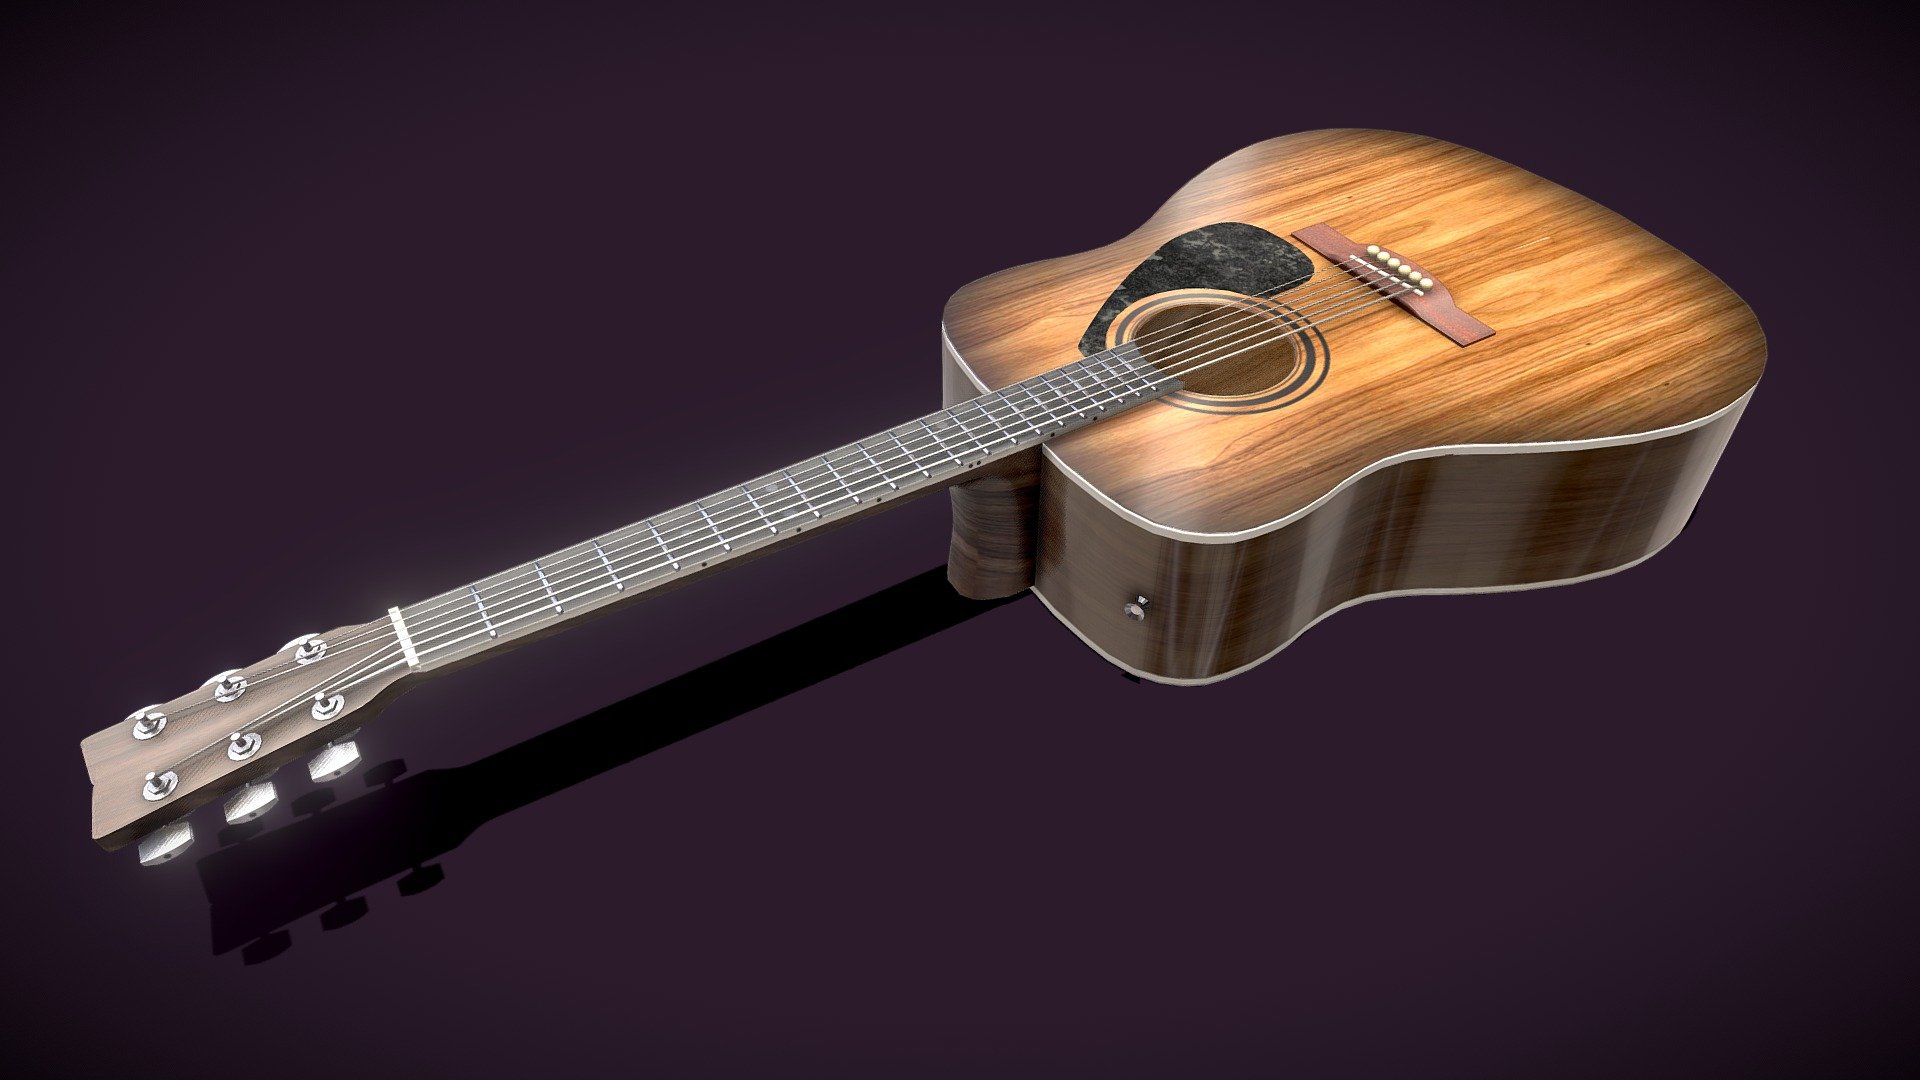 Lowpoly Generic Brandless Acoustic guitar. fully textured,1 mesh, 1 material, 2048 Diffuse/Metalness/Roughness.

Blender file has the mesh as non-triangulated 3d model